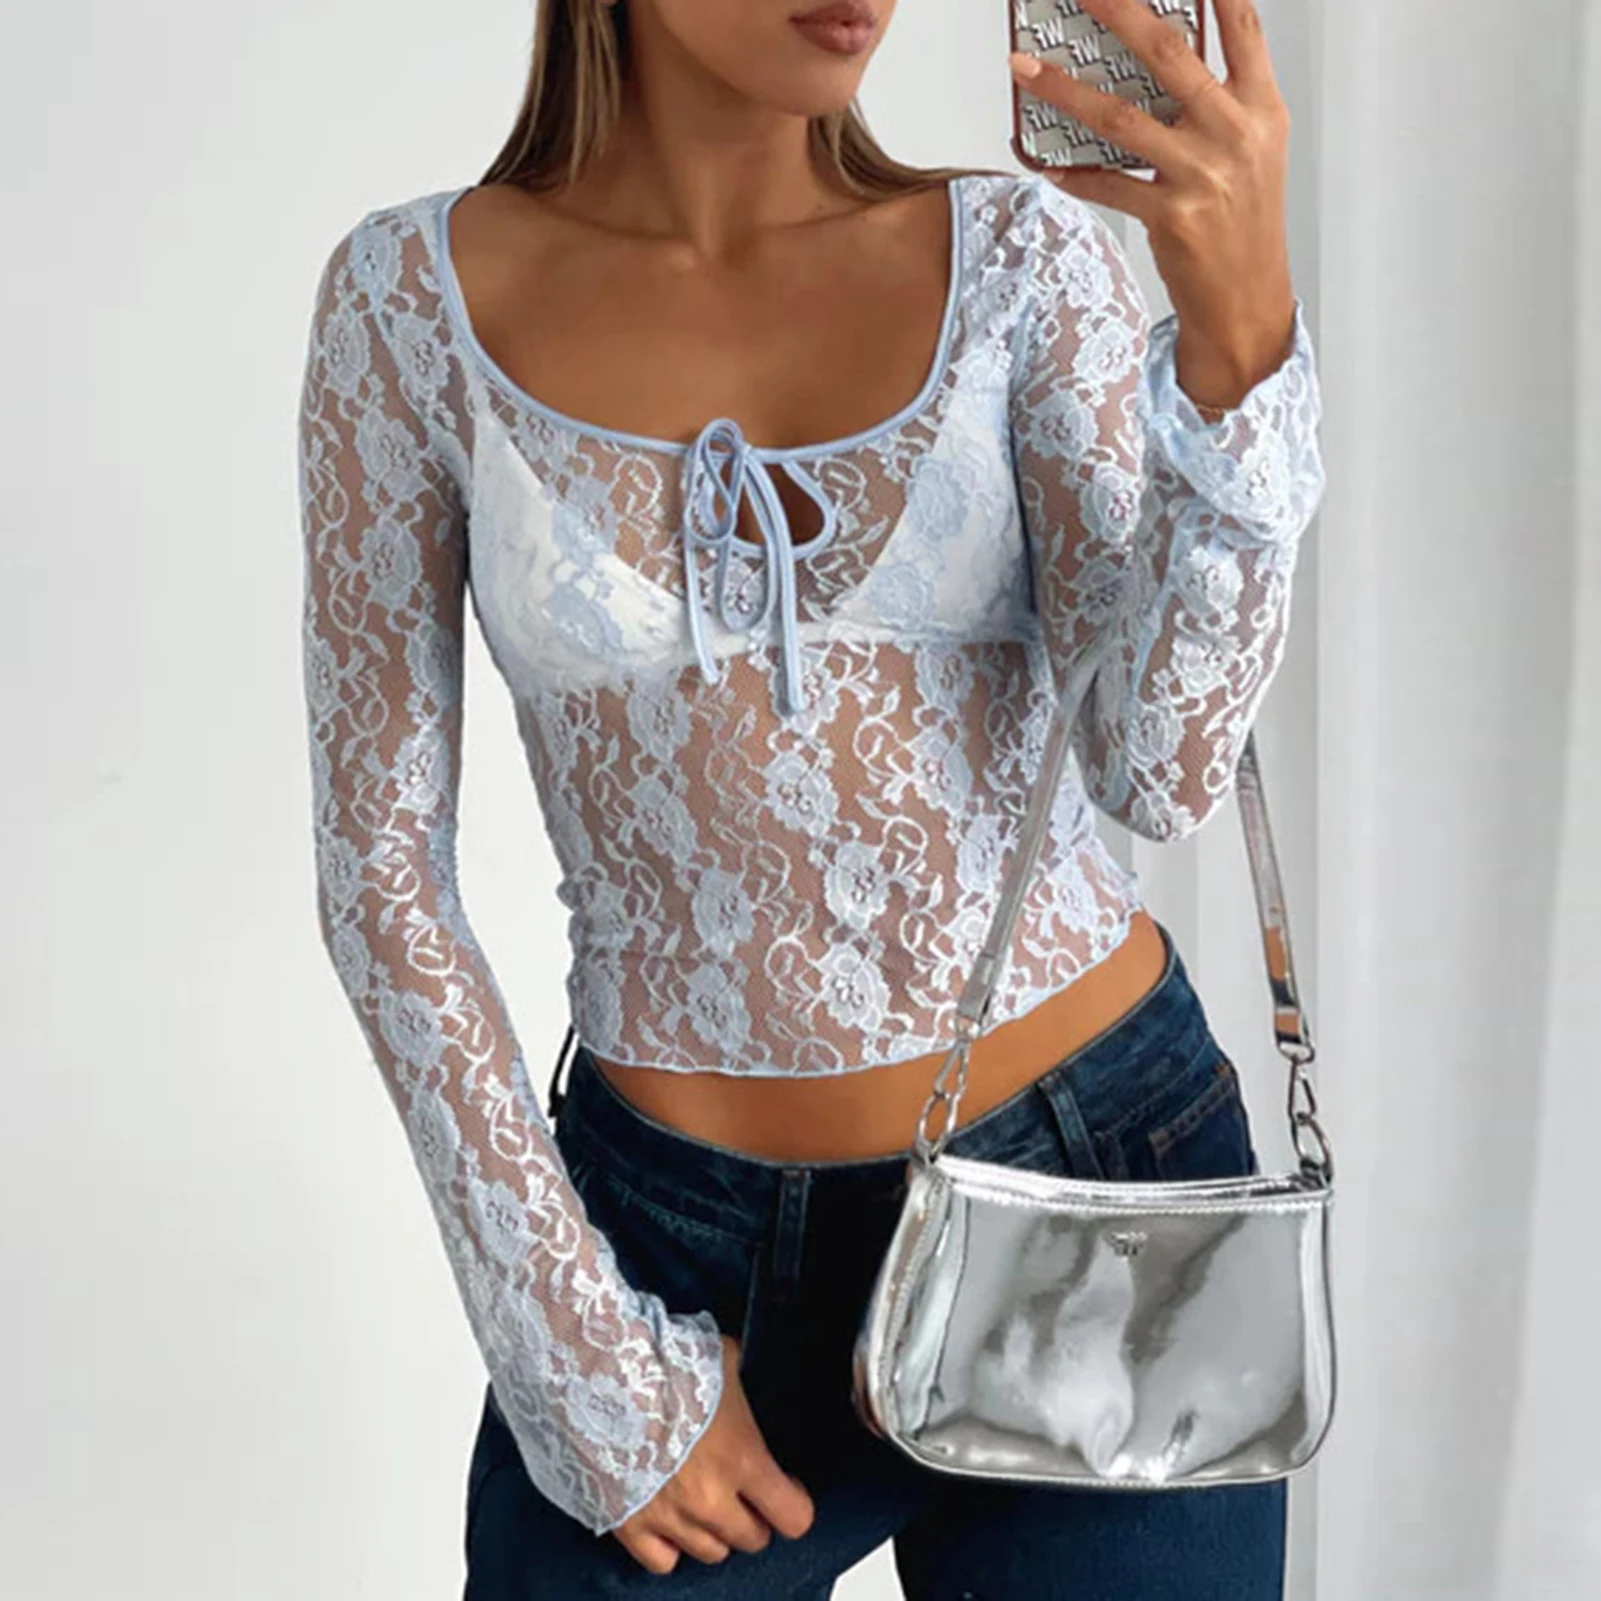 

Stringy Selvedge Ladies Navel Exposed Top Women Lace Crop Top See Through Square Neck Slim Fit Spicy Girl Party Clothing